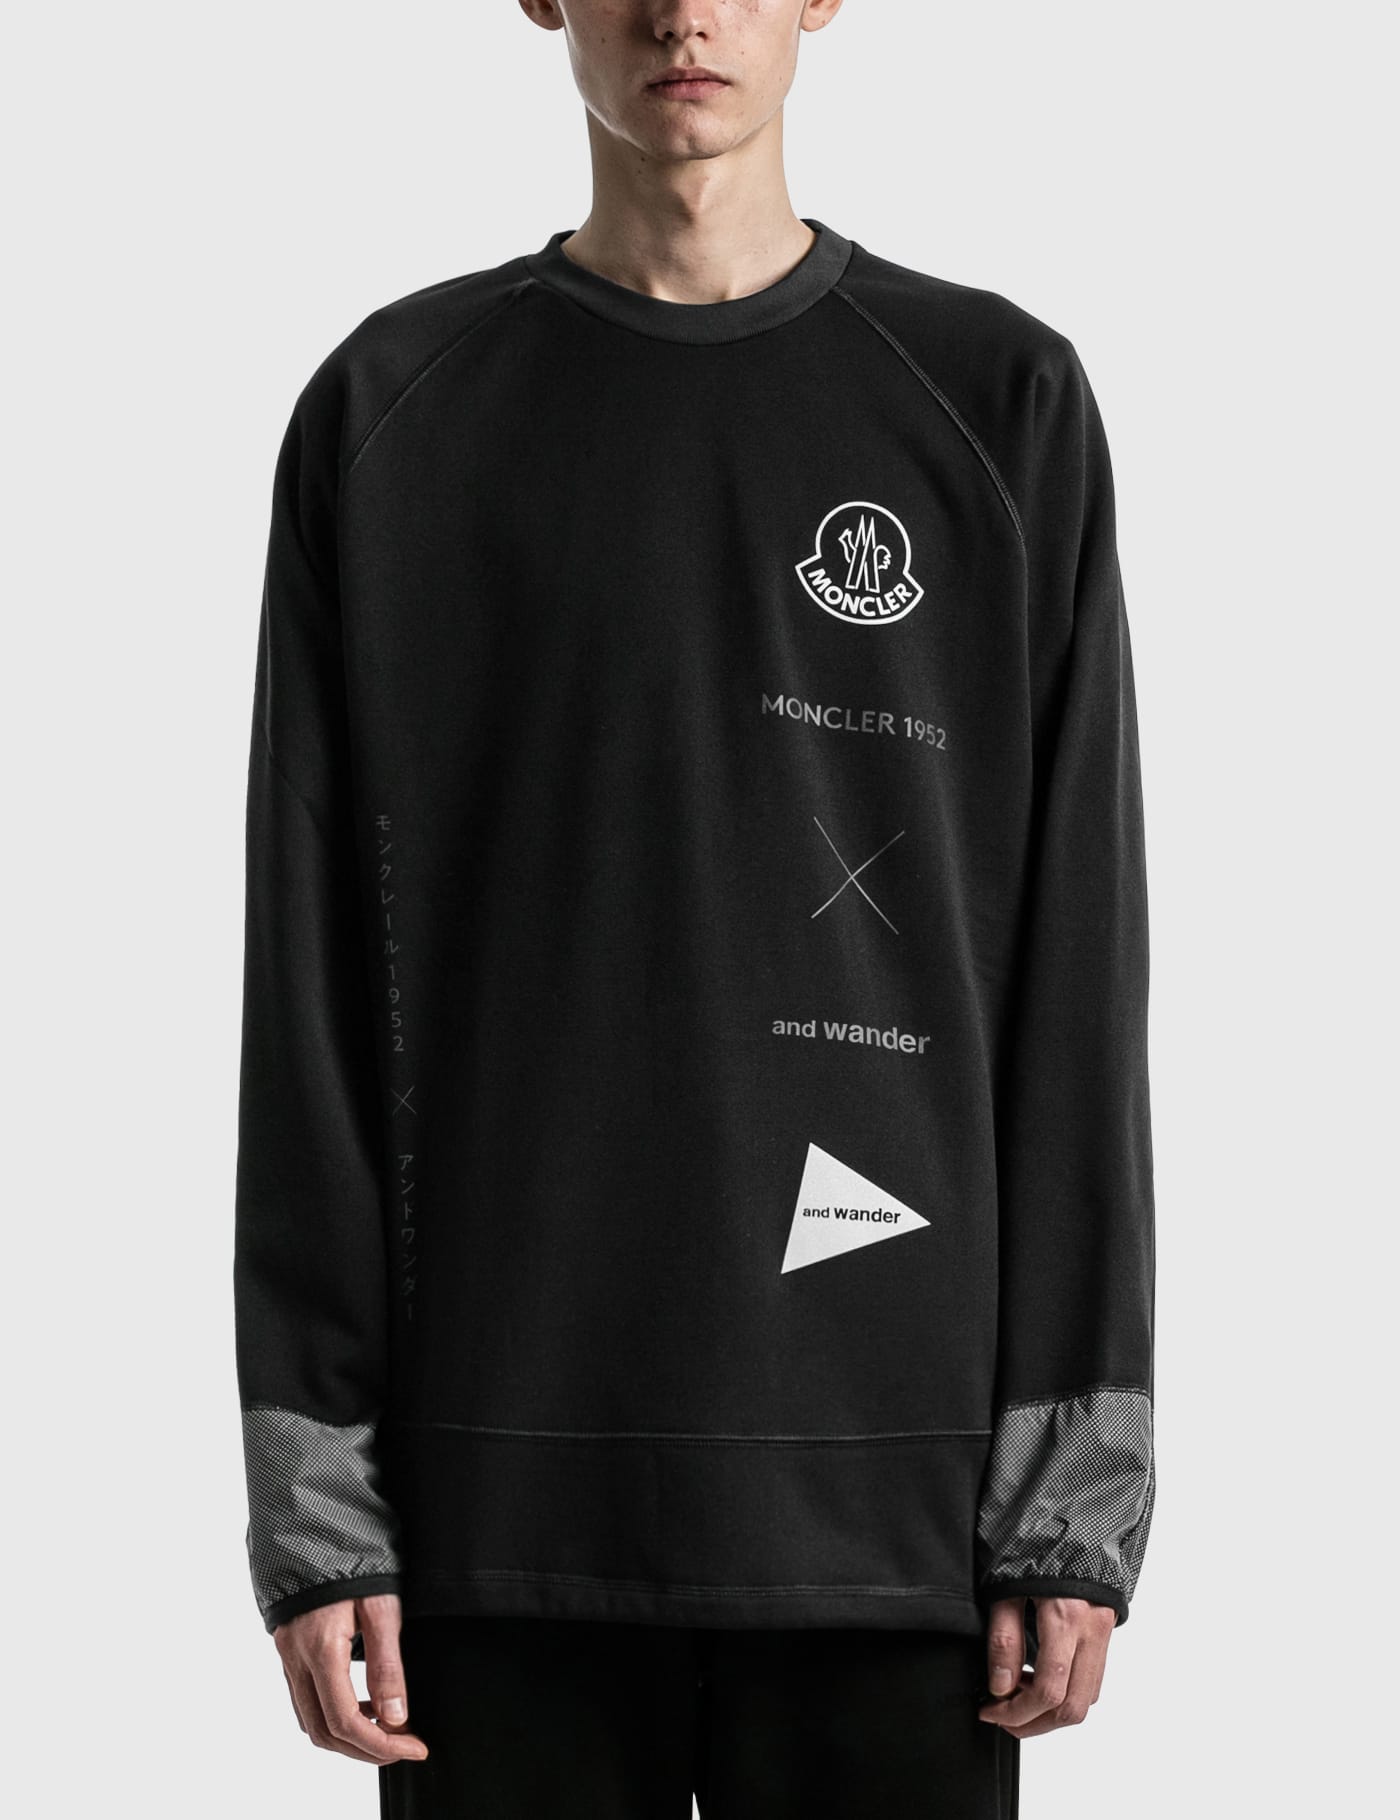 Moncler Genius - Moncler Genius 1952 x and wander Sweatshirt | HBX -  Globally Curated Fashion and Lifestyle by Hypebeast